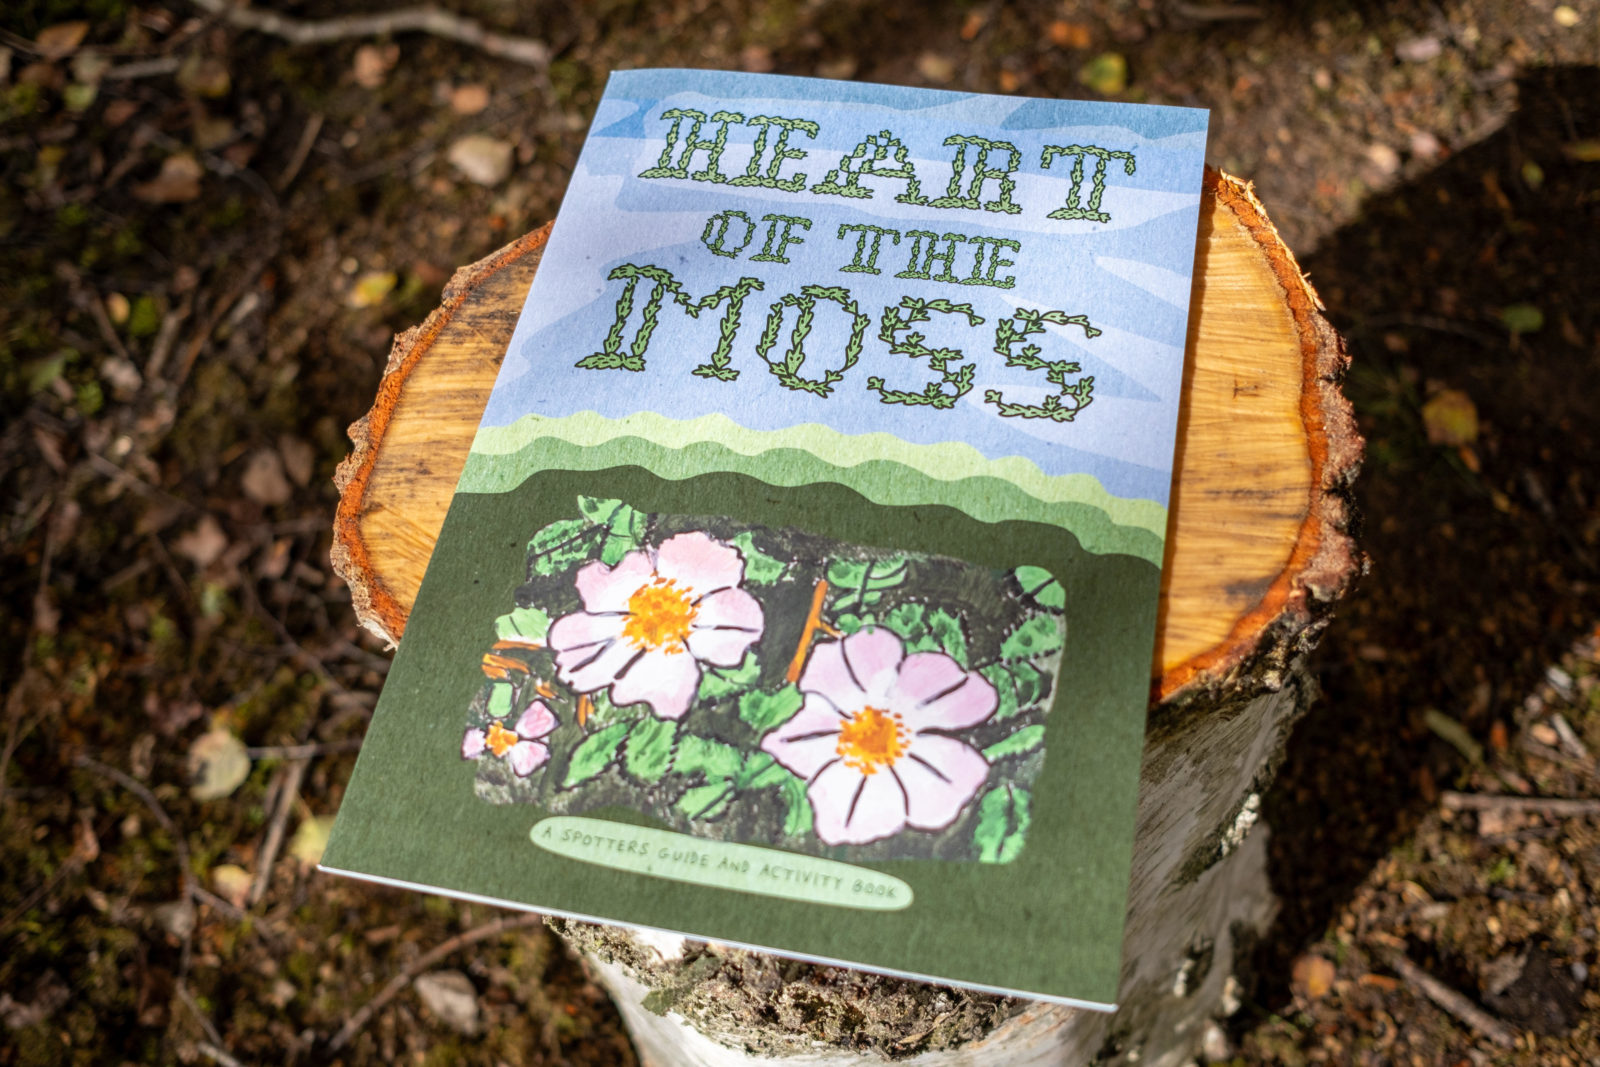 Photograph of an activity book with floral illustrations on the front, entitled Heart of the Moss